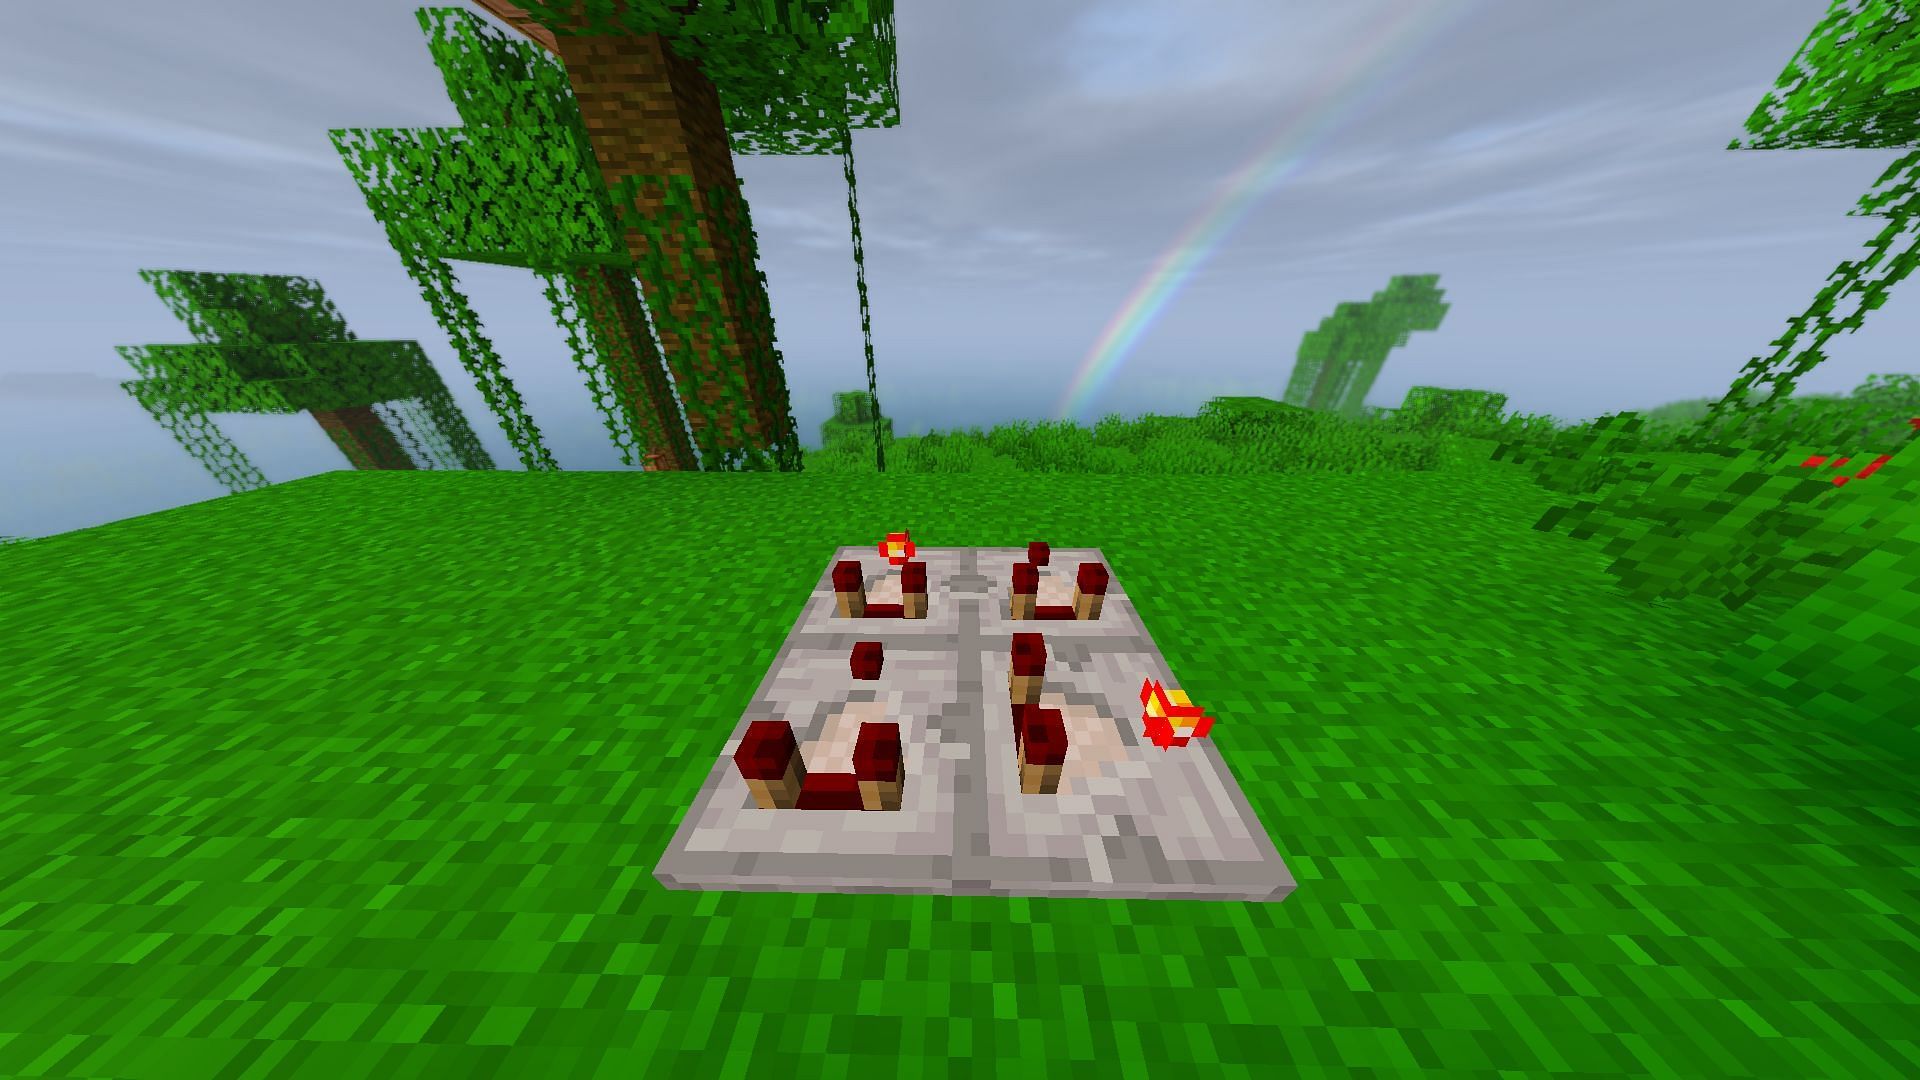 How to make a redstone comparator and how does it work in Minecraft